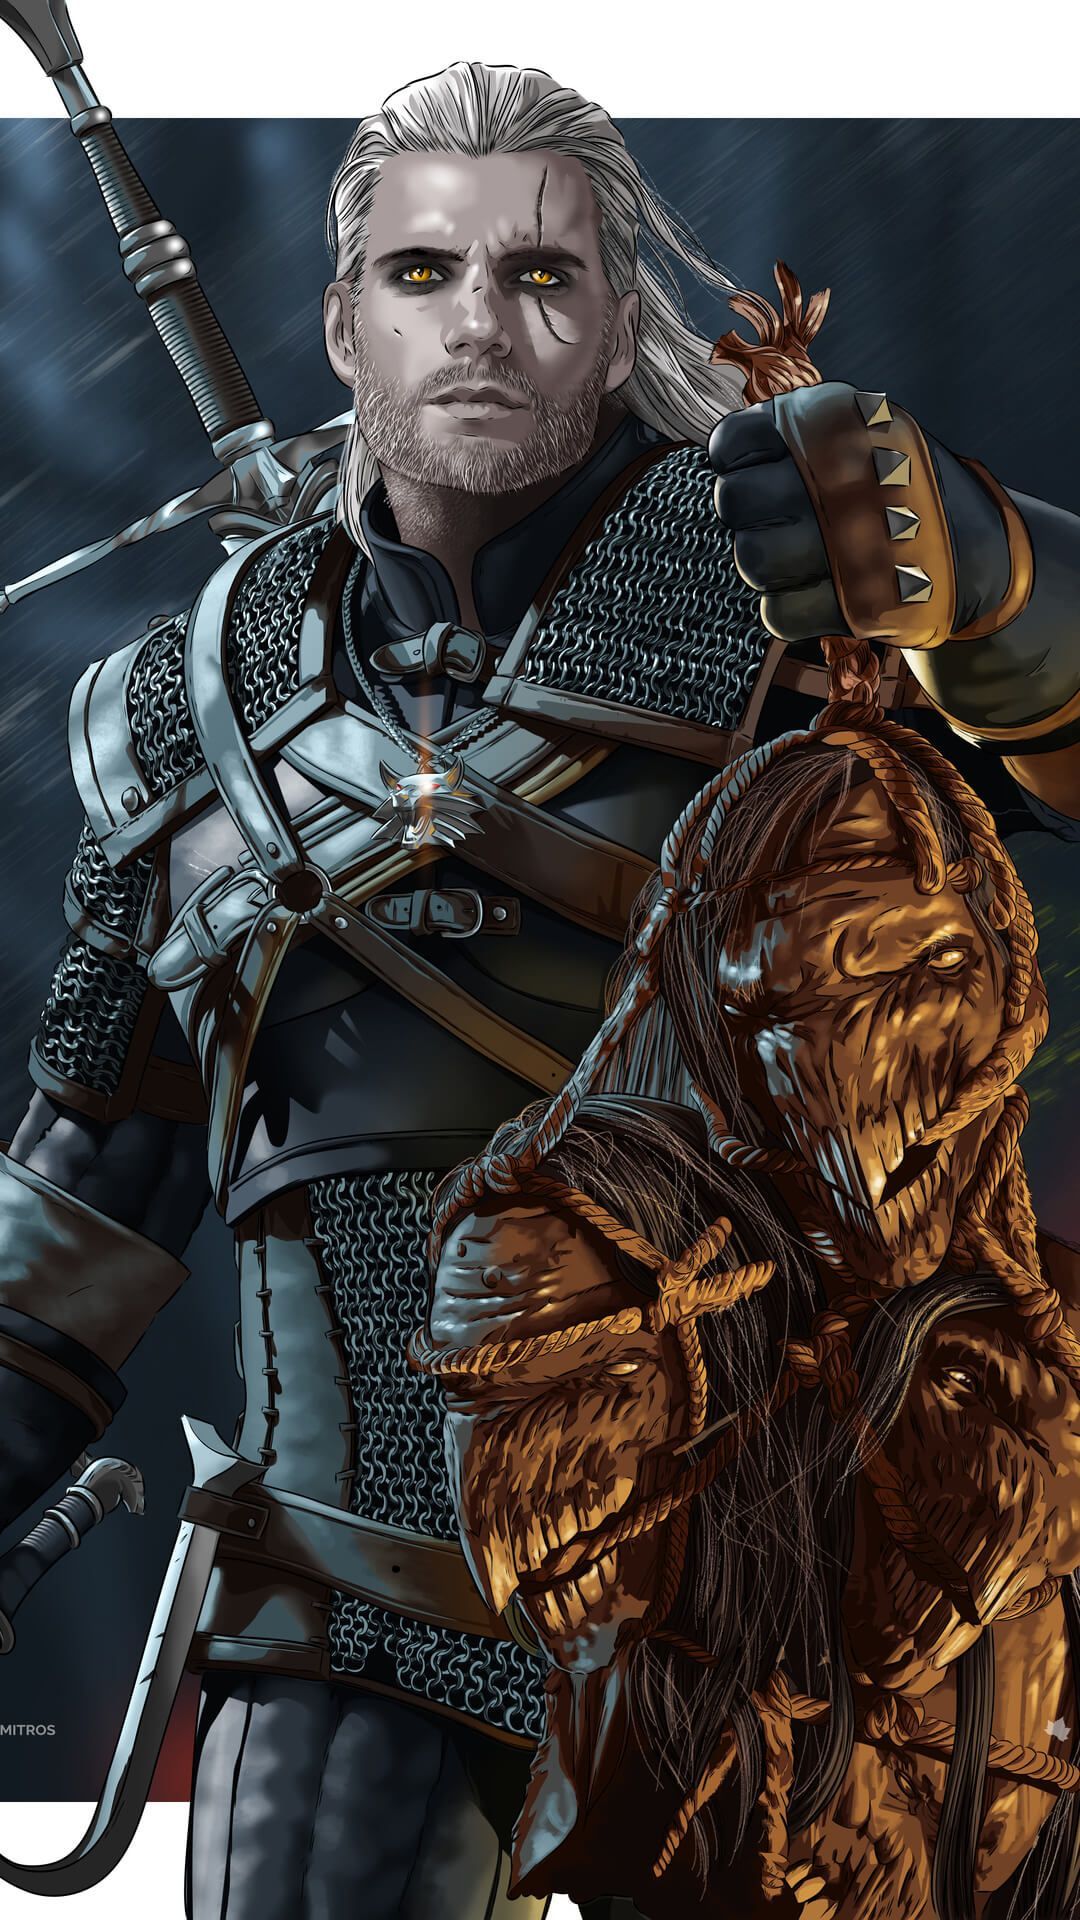 The Witcher Wallpaper phone background mobile 2020. Geralt of rivia, The witcher, Witcher art